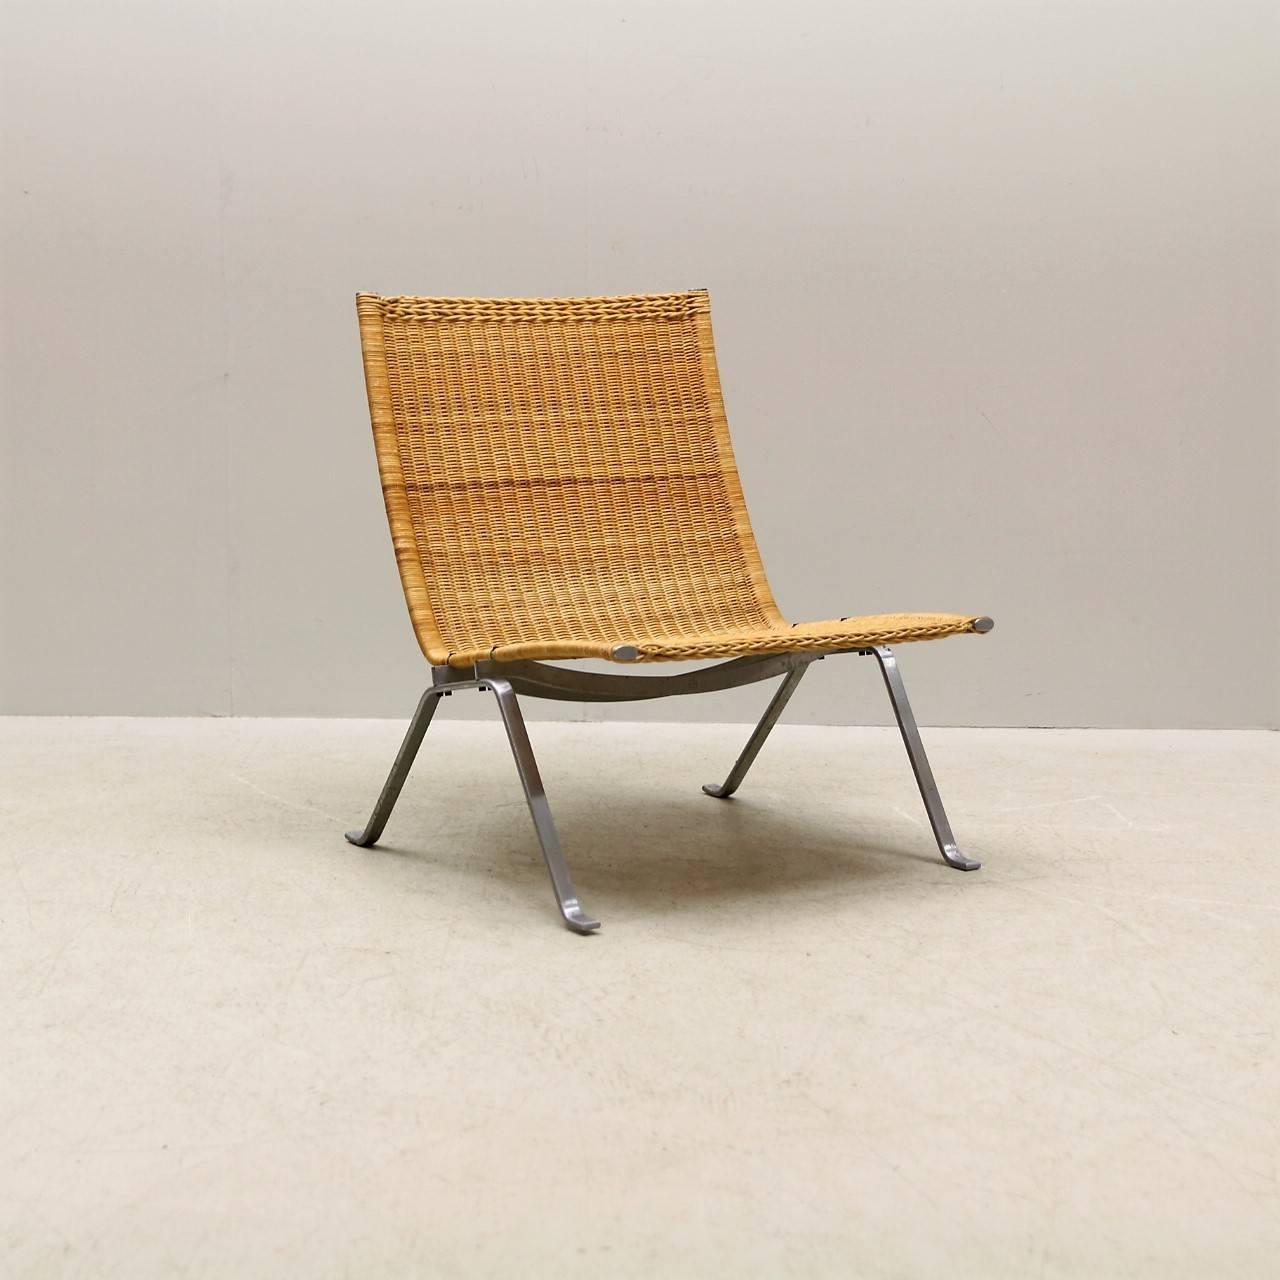 Poul Kjærholm PK-22 with a frame of steel, seat and back with original patinated cane. Designed by Poul Kjærholm in 1956 and manufactured and stamped by E. Kold Christensen, Denmark. Good vintage condition. Original cane intact. Minor wear and loss